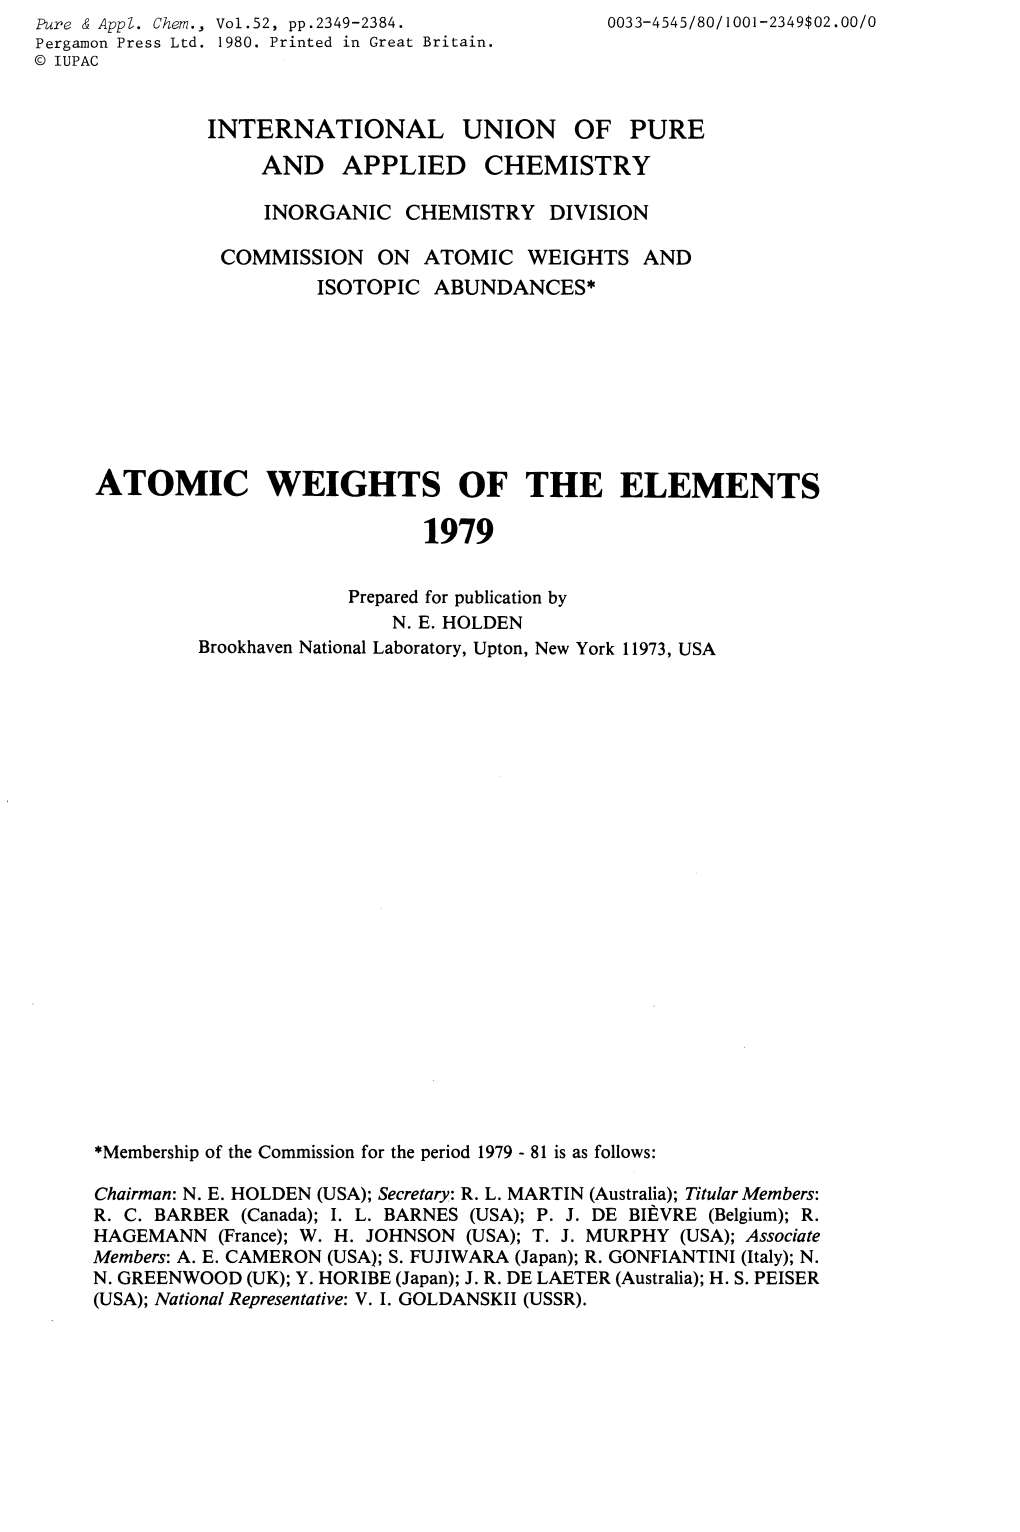 Atomic Weights of the Elements 1979